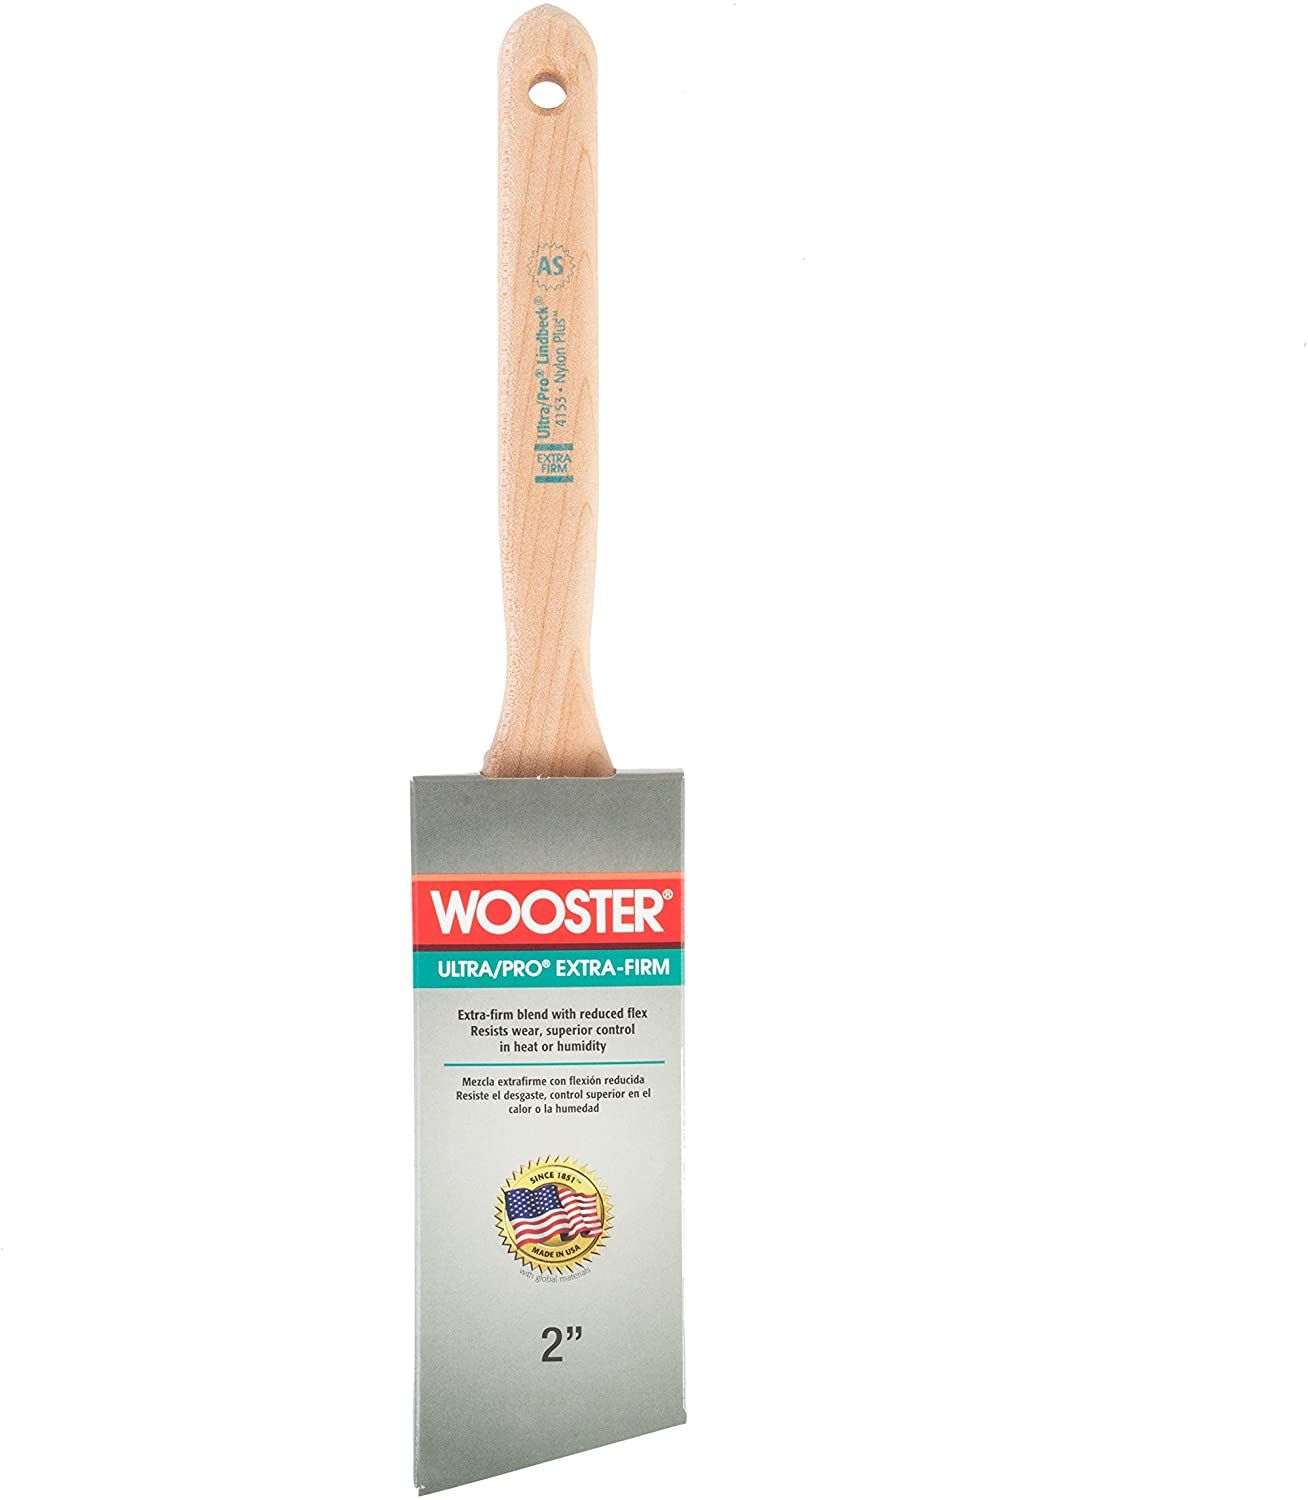 Wooster Ultra/Pro Extra-Firm Lindbeck Angle Sash Paintbrush